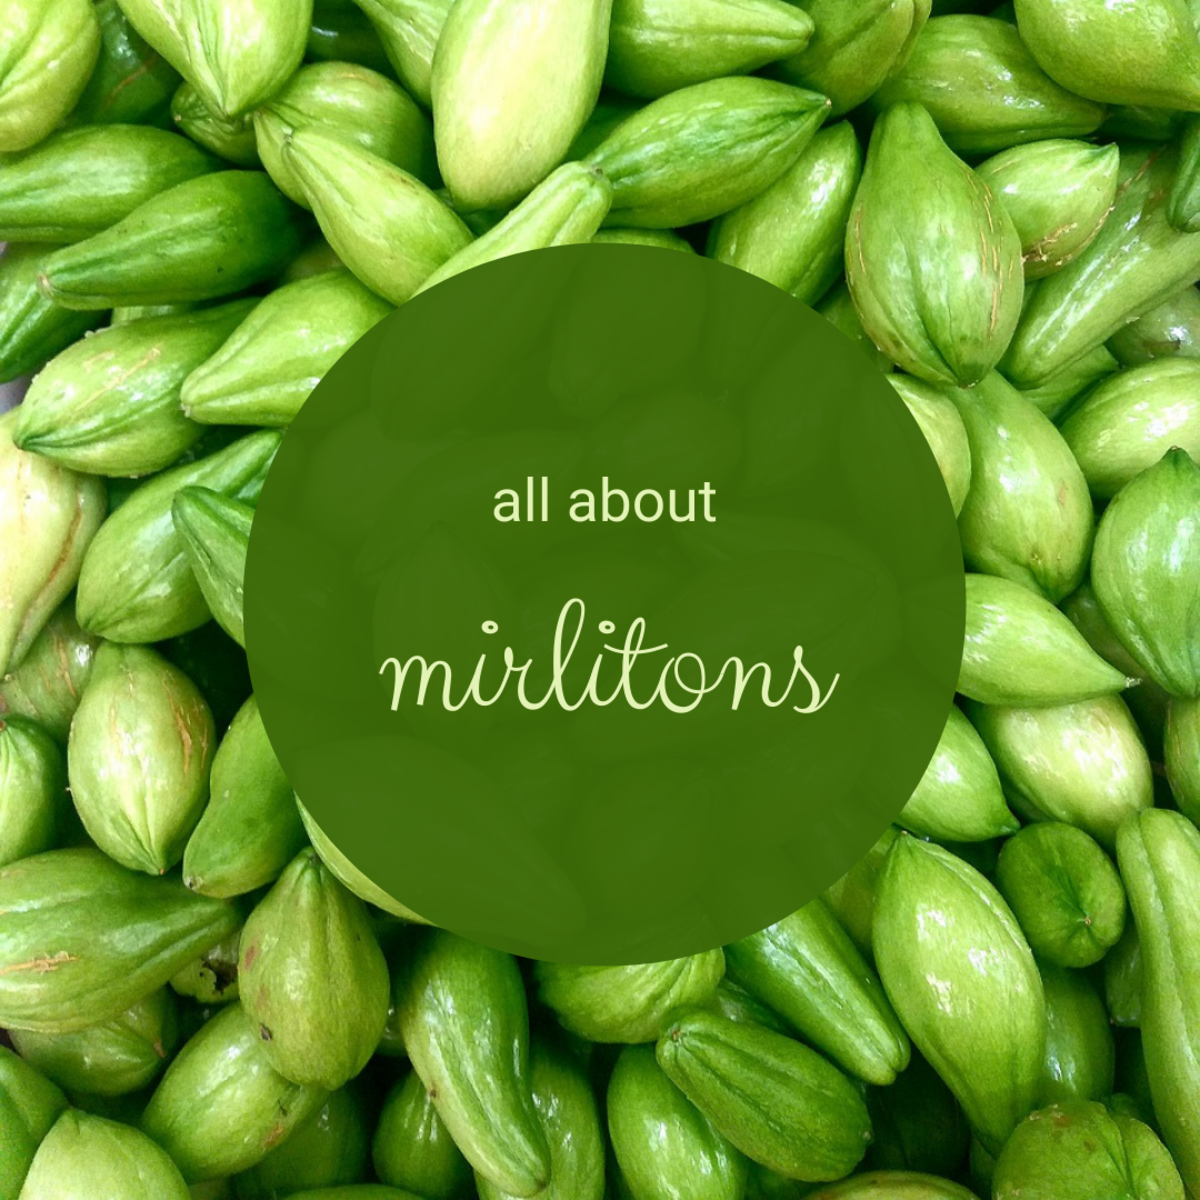 Mirlitons (aka chayote, vegetable pear, and mango squash) are easy to grow and delicious to eat.